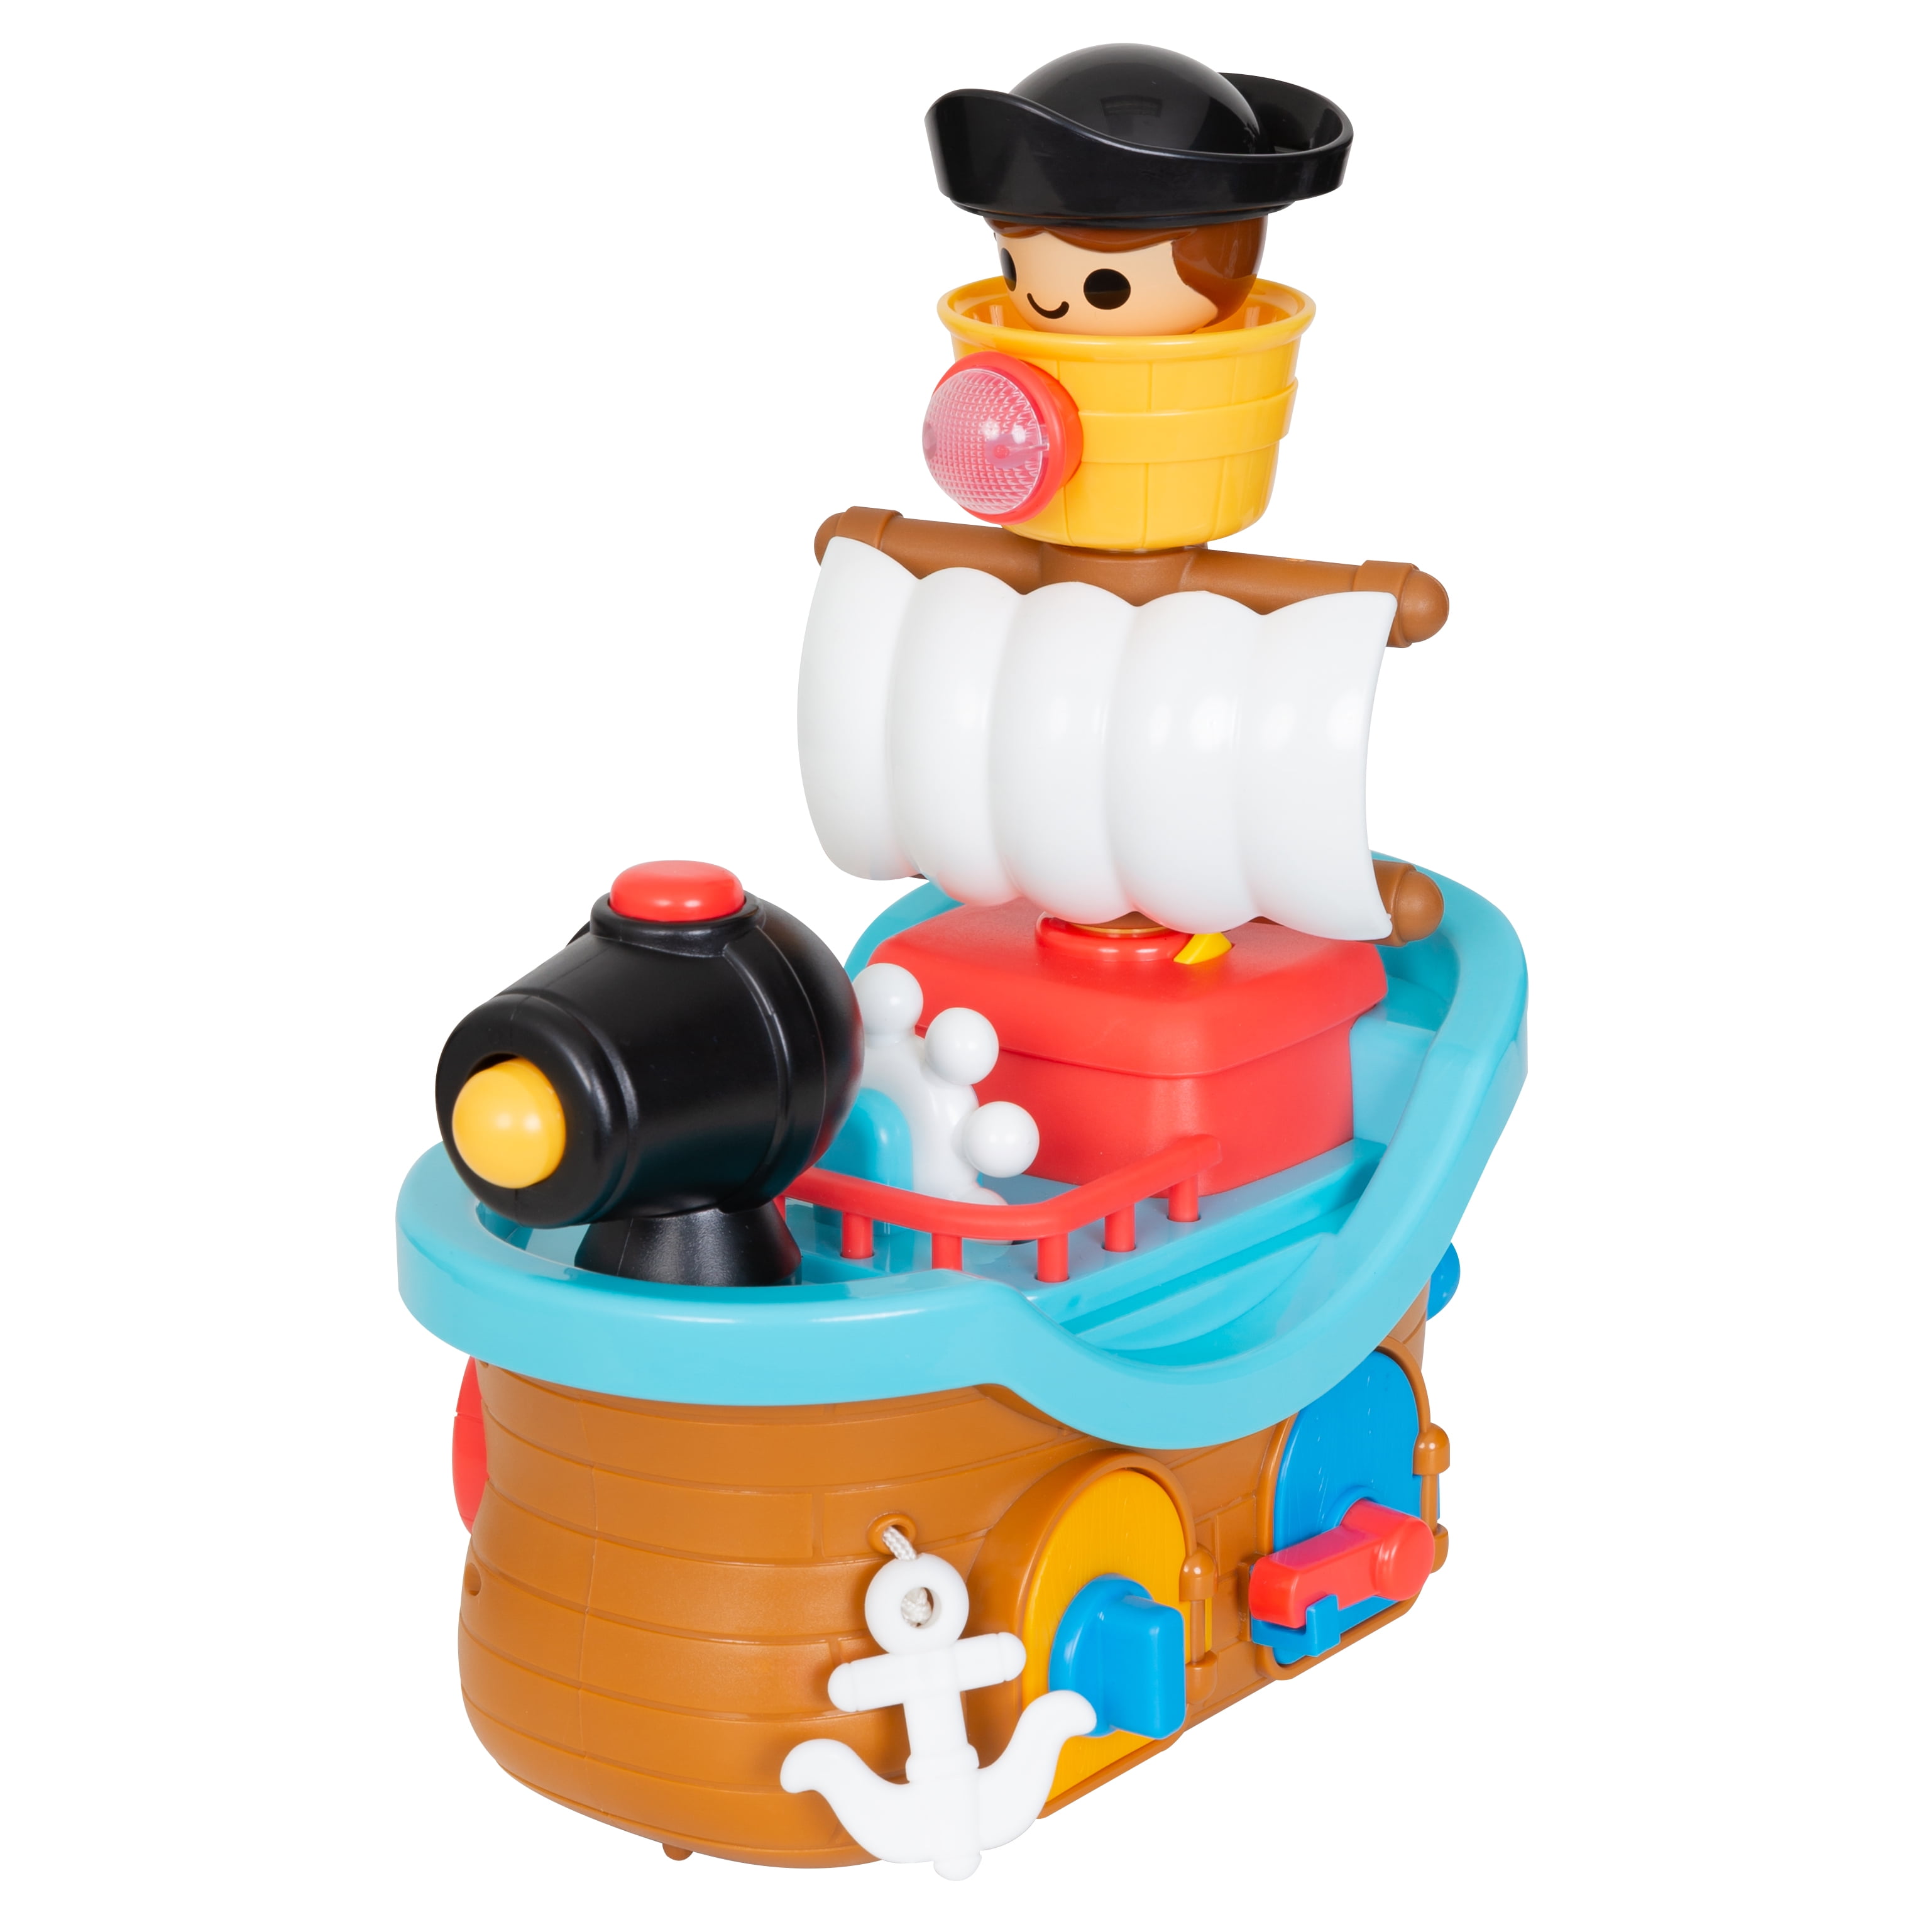 Baby Trend Smart Ship Toy w/ Lights, Sounds and Mechanical Activations $5.55 + Free S&H w/ Prime, Walmart+ or $35+